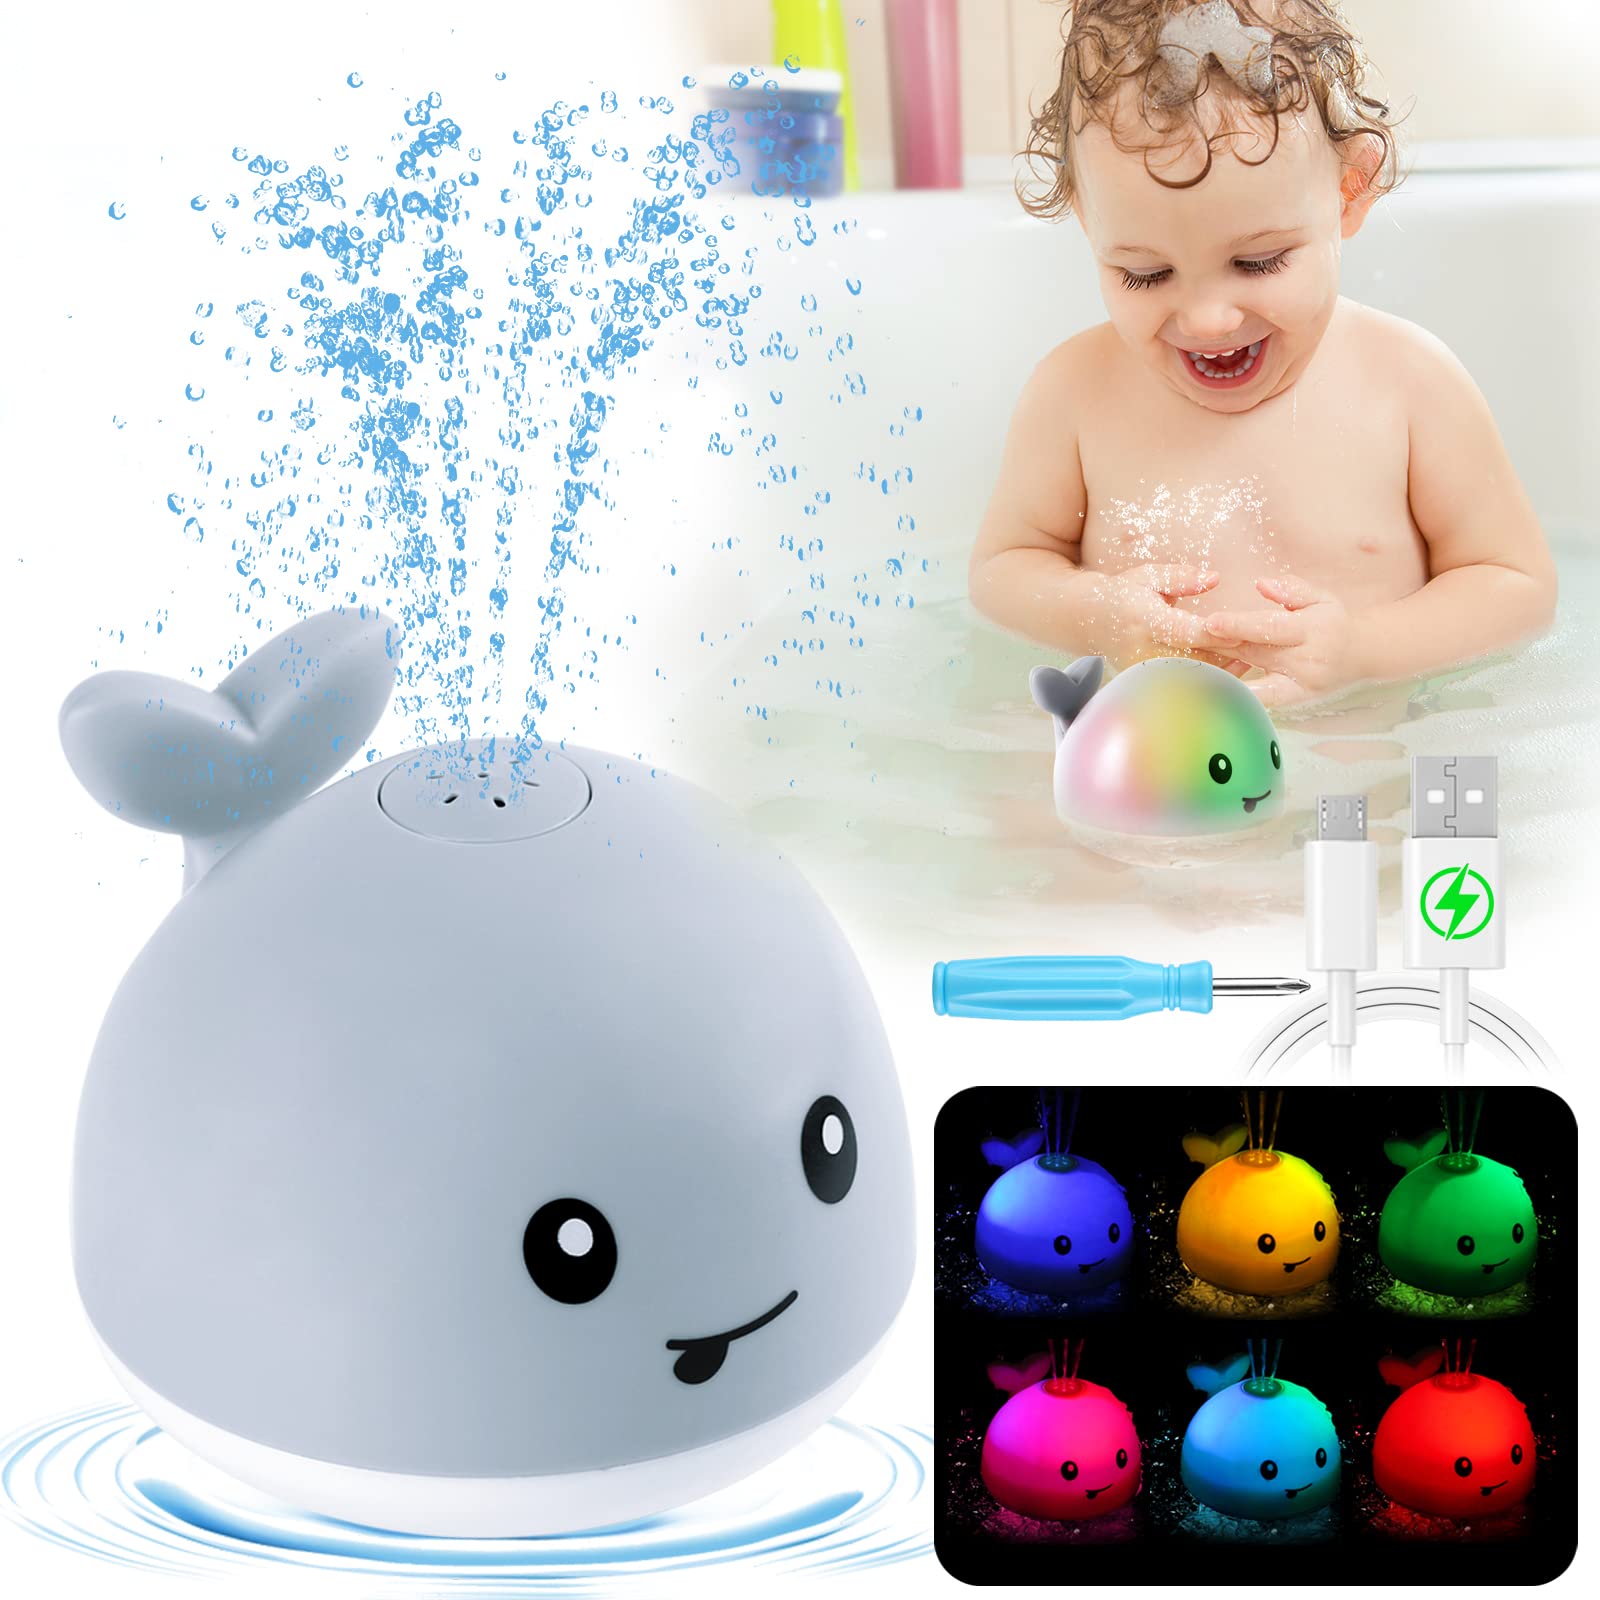 Gigilli Baby Bath Toys, Rechargeable Baby Toys Whale, Light Up Bath Toys, Sprinkler Bathtub Toys for Toddlers Infant Kids Boys Girls, Spray Water Bath Toy, Pool Bathroom Baby Toy